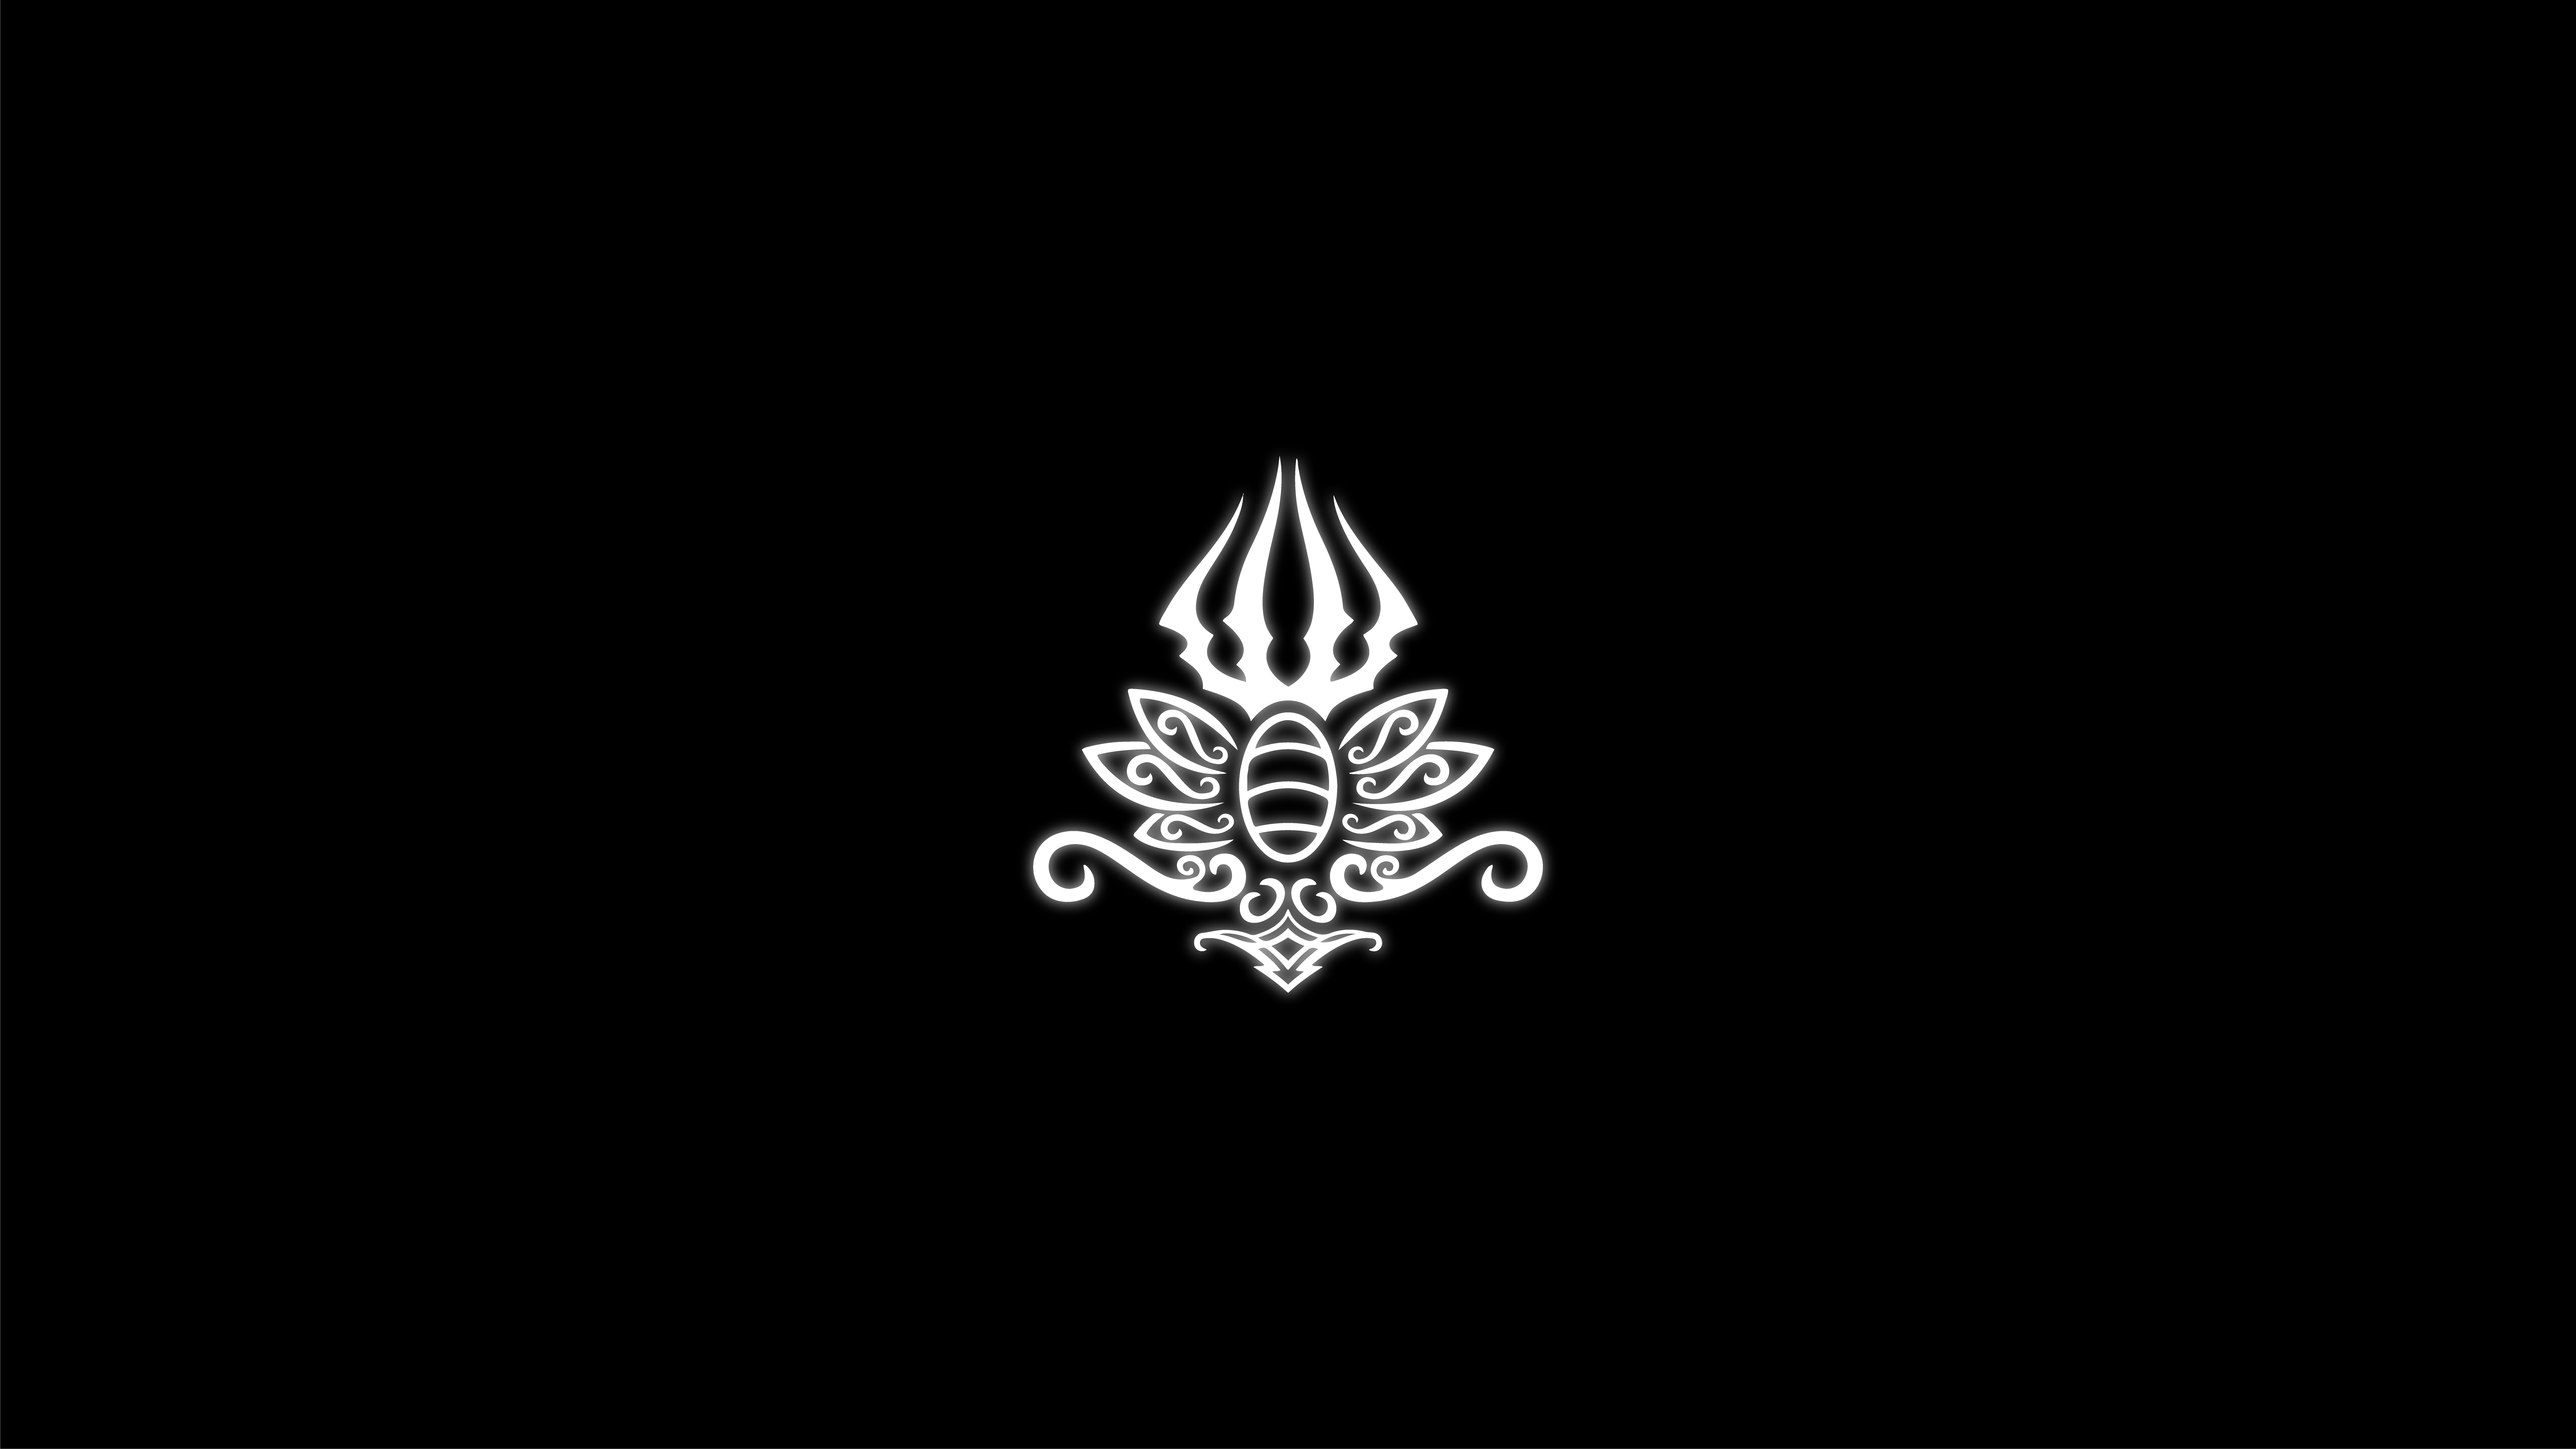 General 8001x4501 Hollow Knight illustration simple background black background minimalism video games